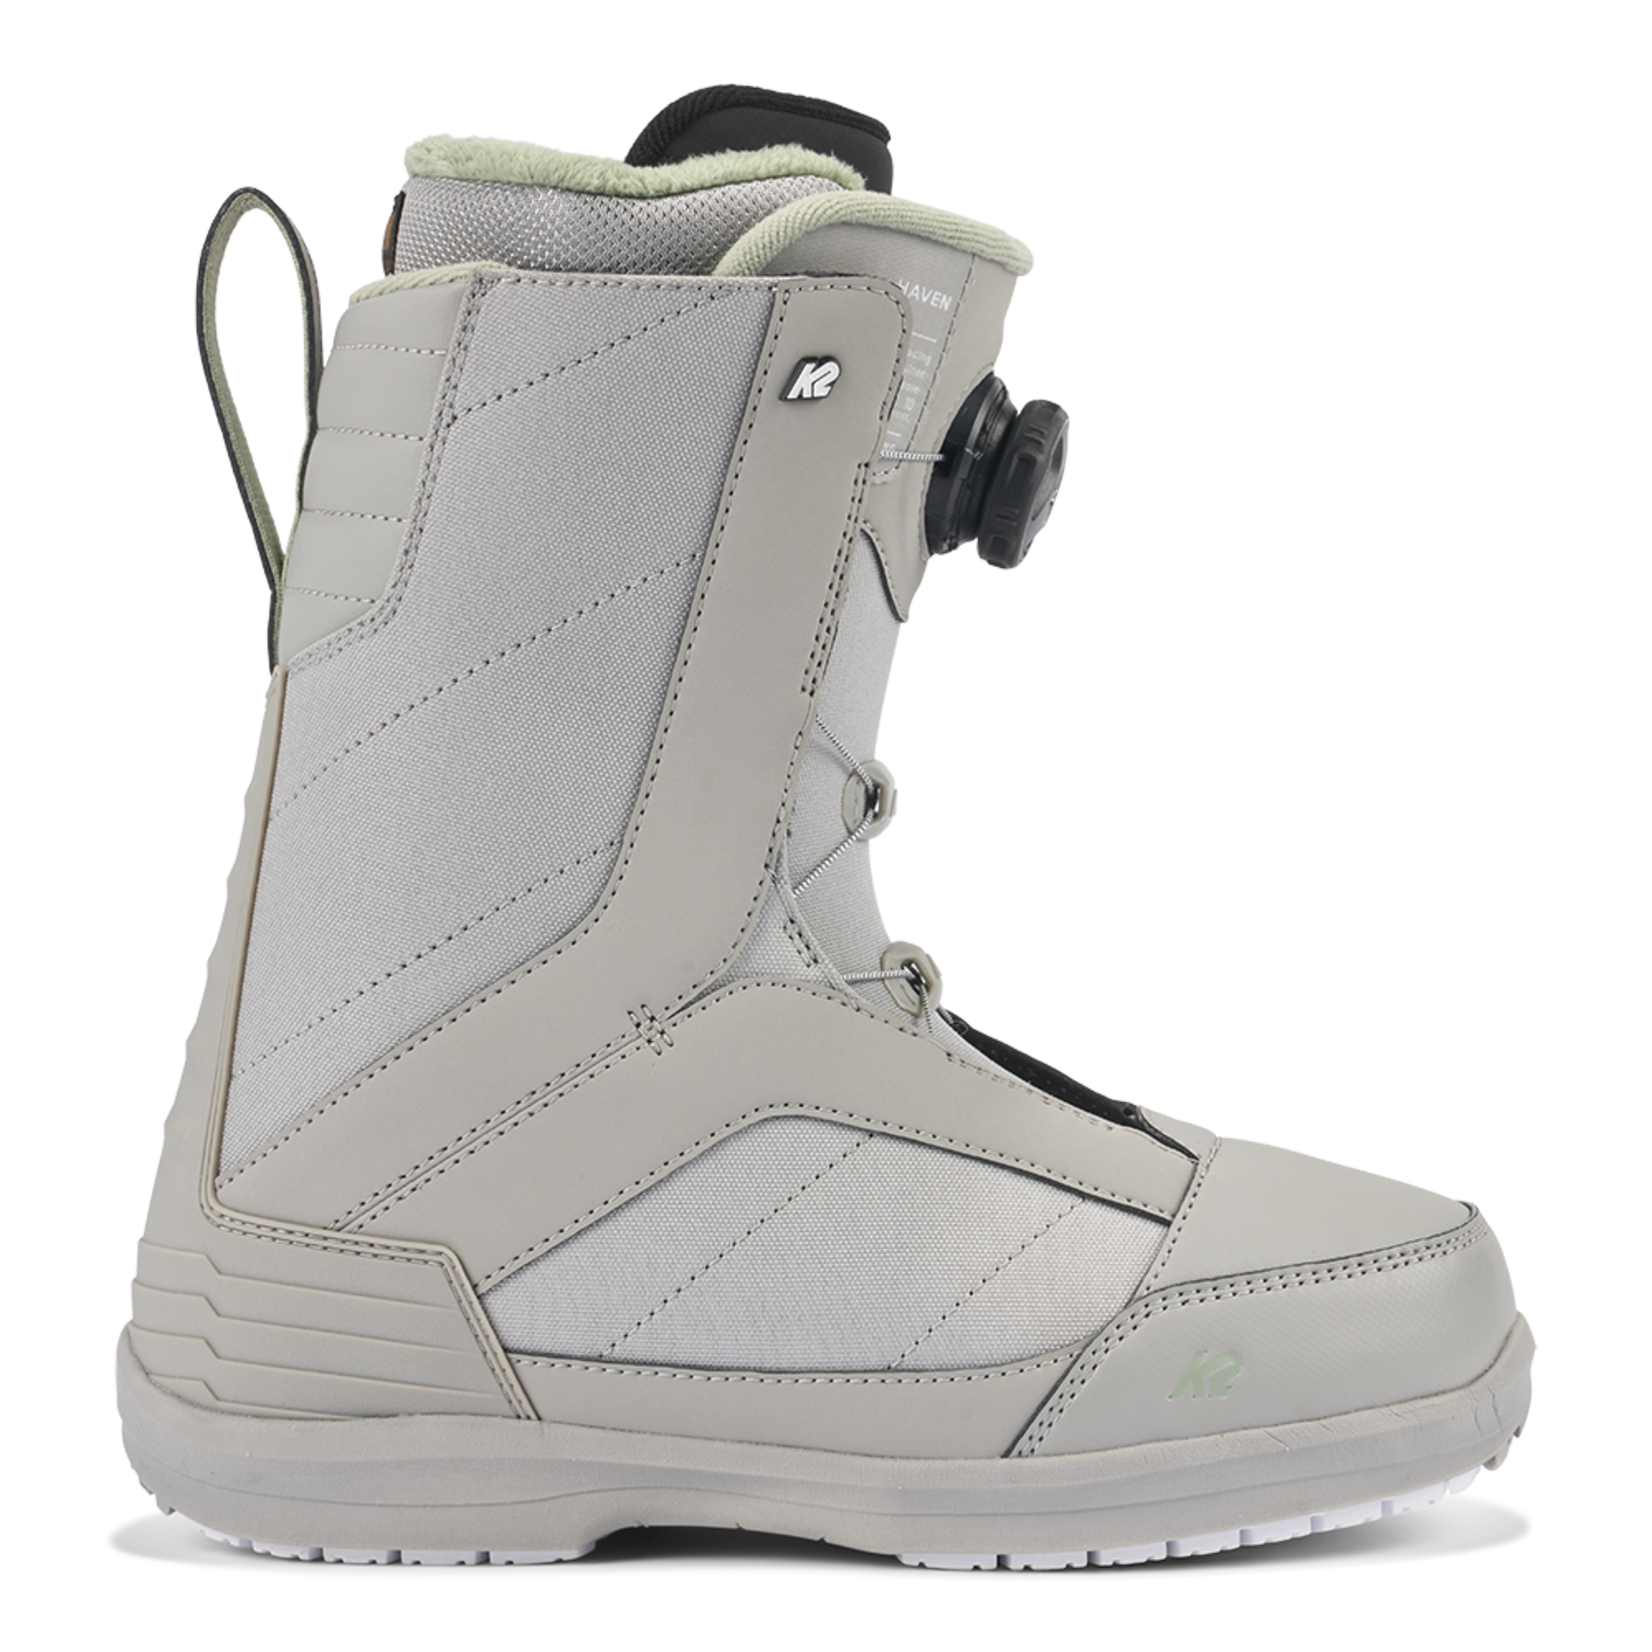 K2 HAVEN Boots - 2024